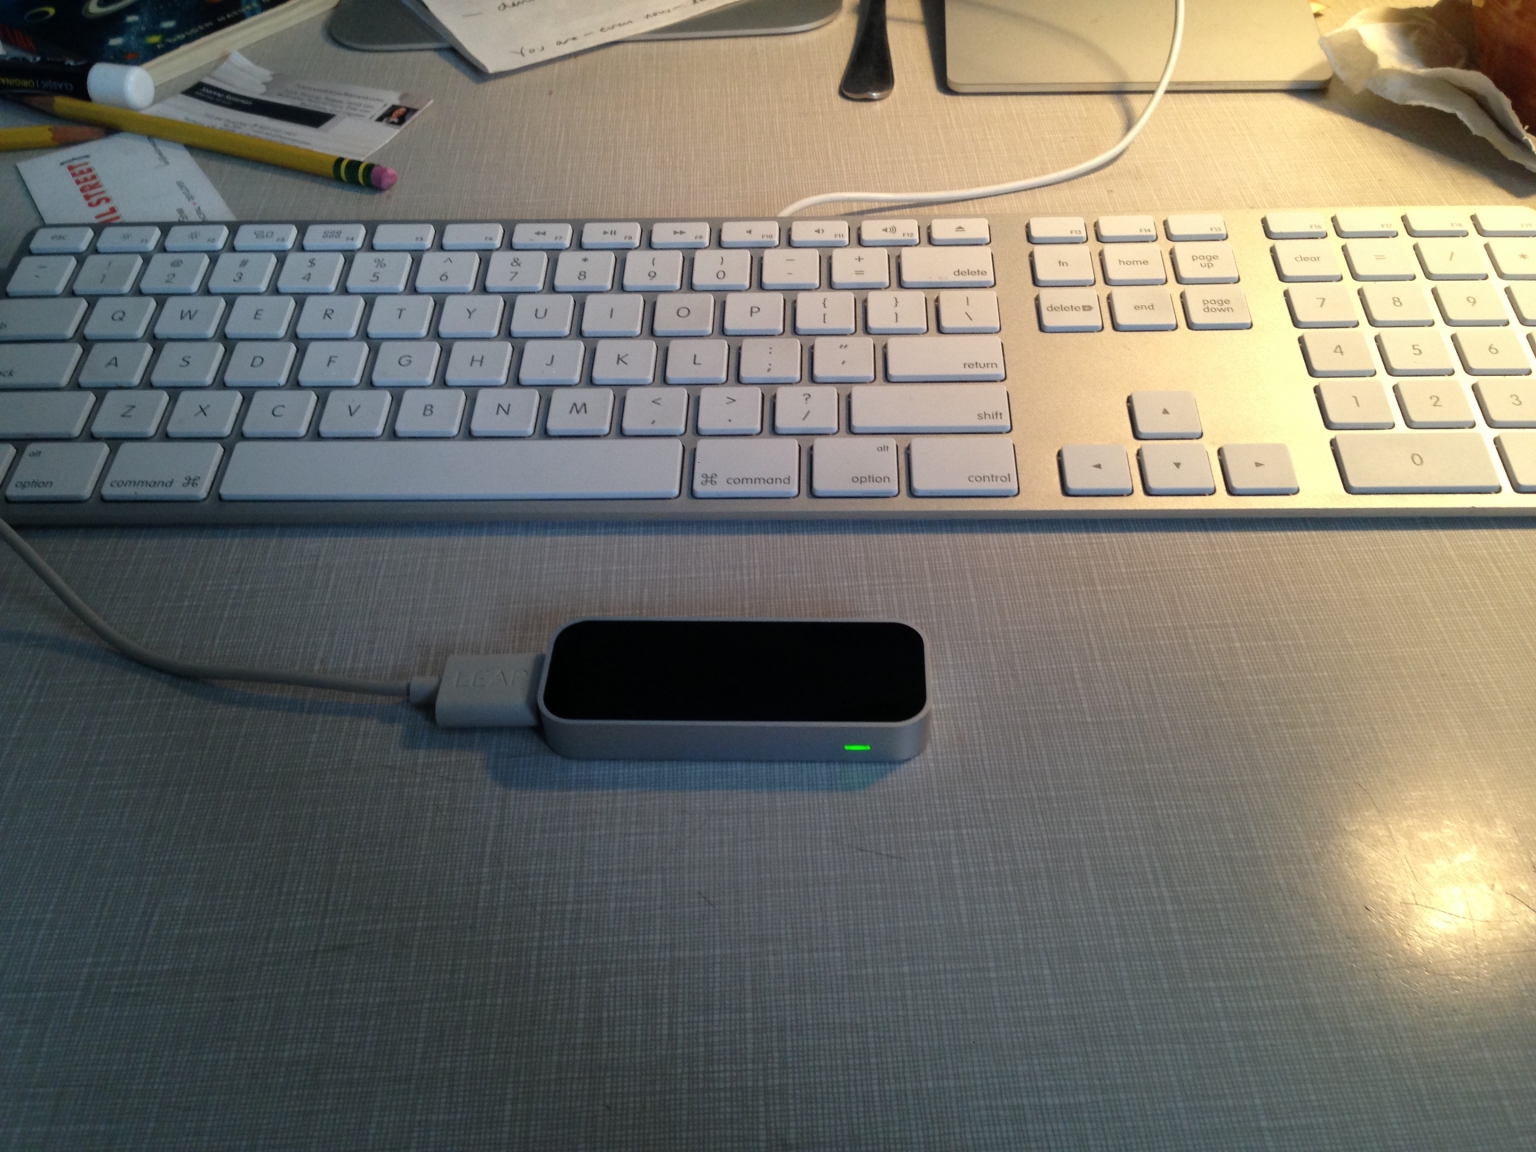 The Leap Motion device